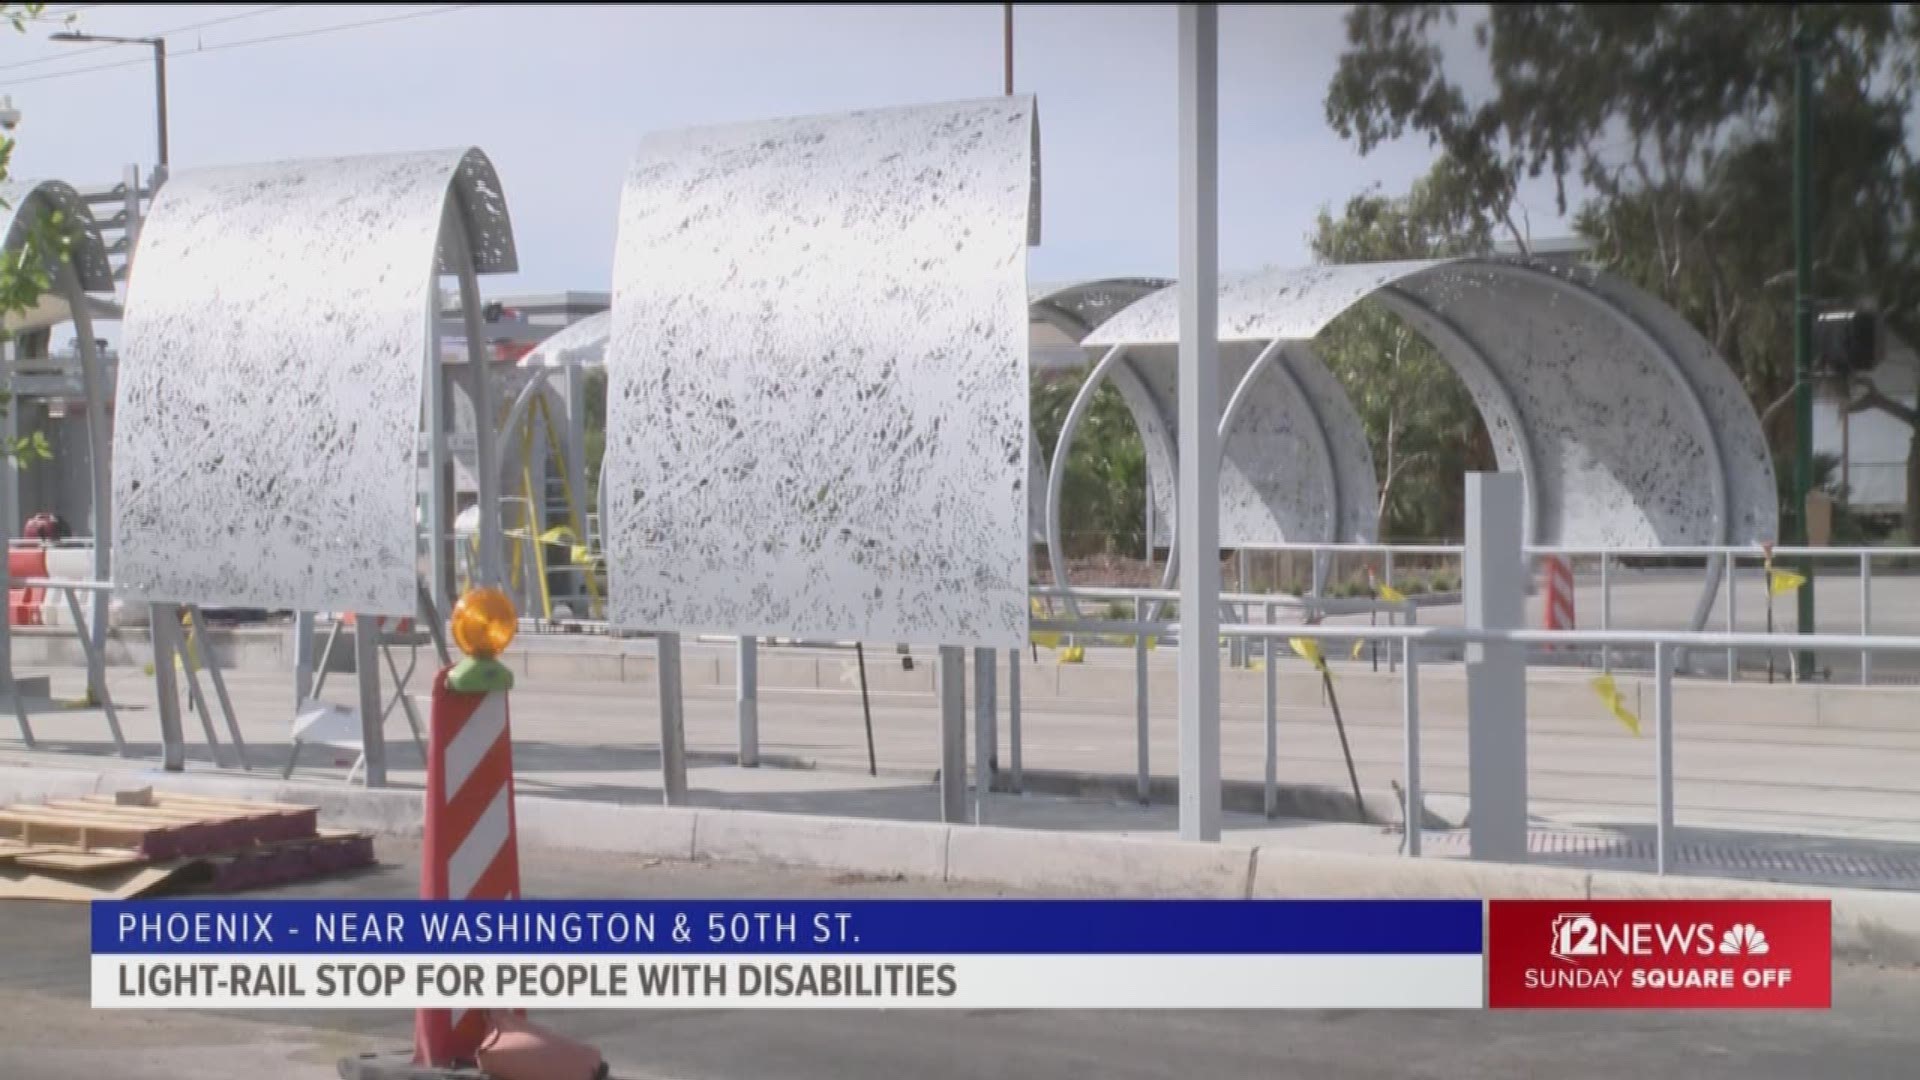 A new light-rail stop being unveiled next week is a first for Phoenix: It's designed specifically for people with disabilities and could become a national model. Phil Pangrazio, president and CEO of Ability360, explains the features of the new stop and how it came to be.